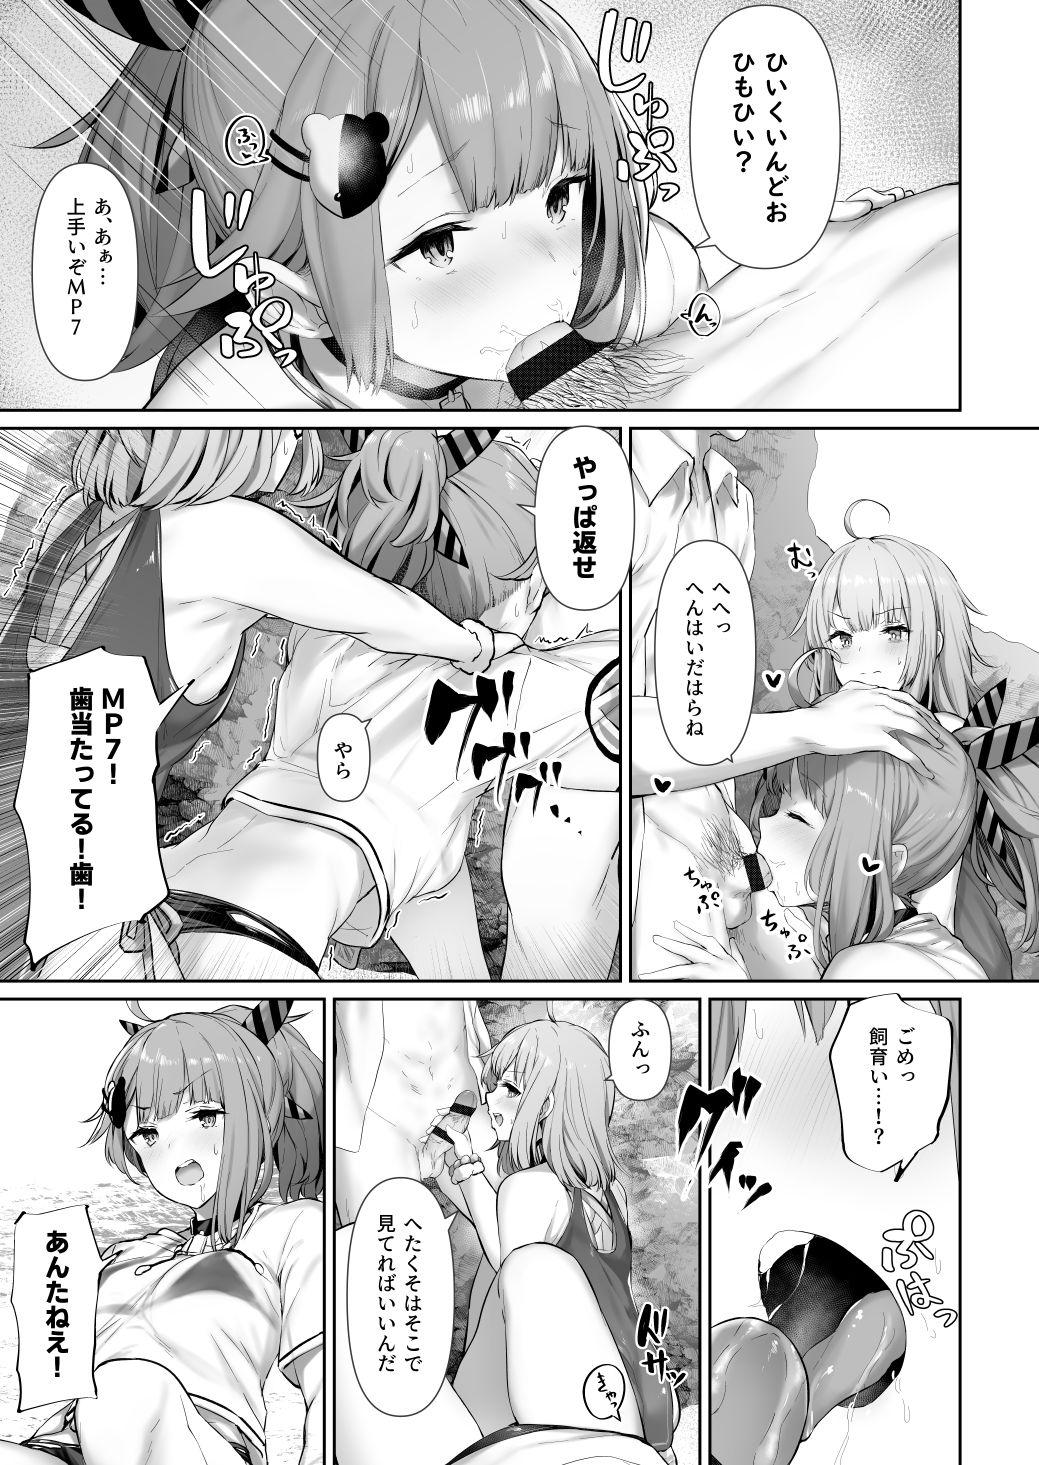 Gaystraight MP7 and AA-12 - Girls frontline  - Page 3